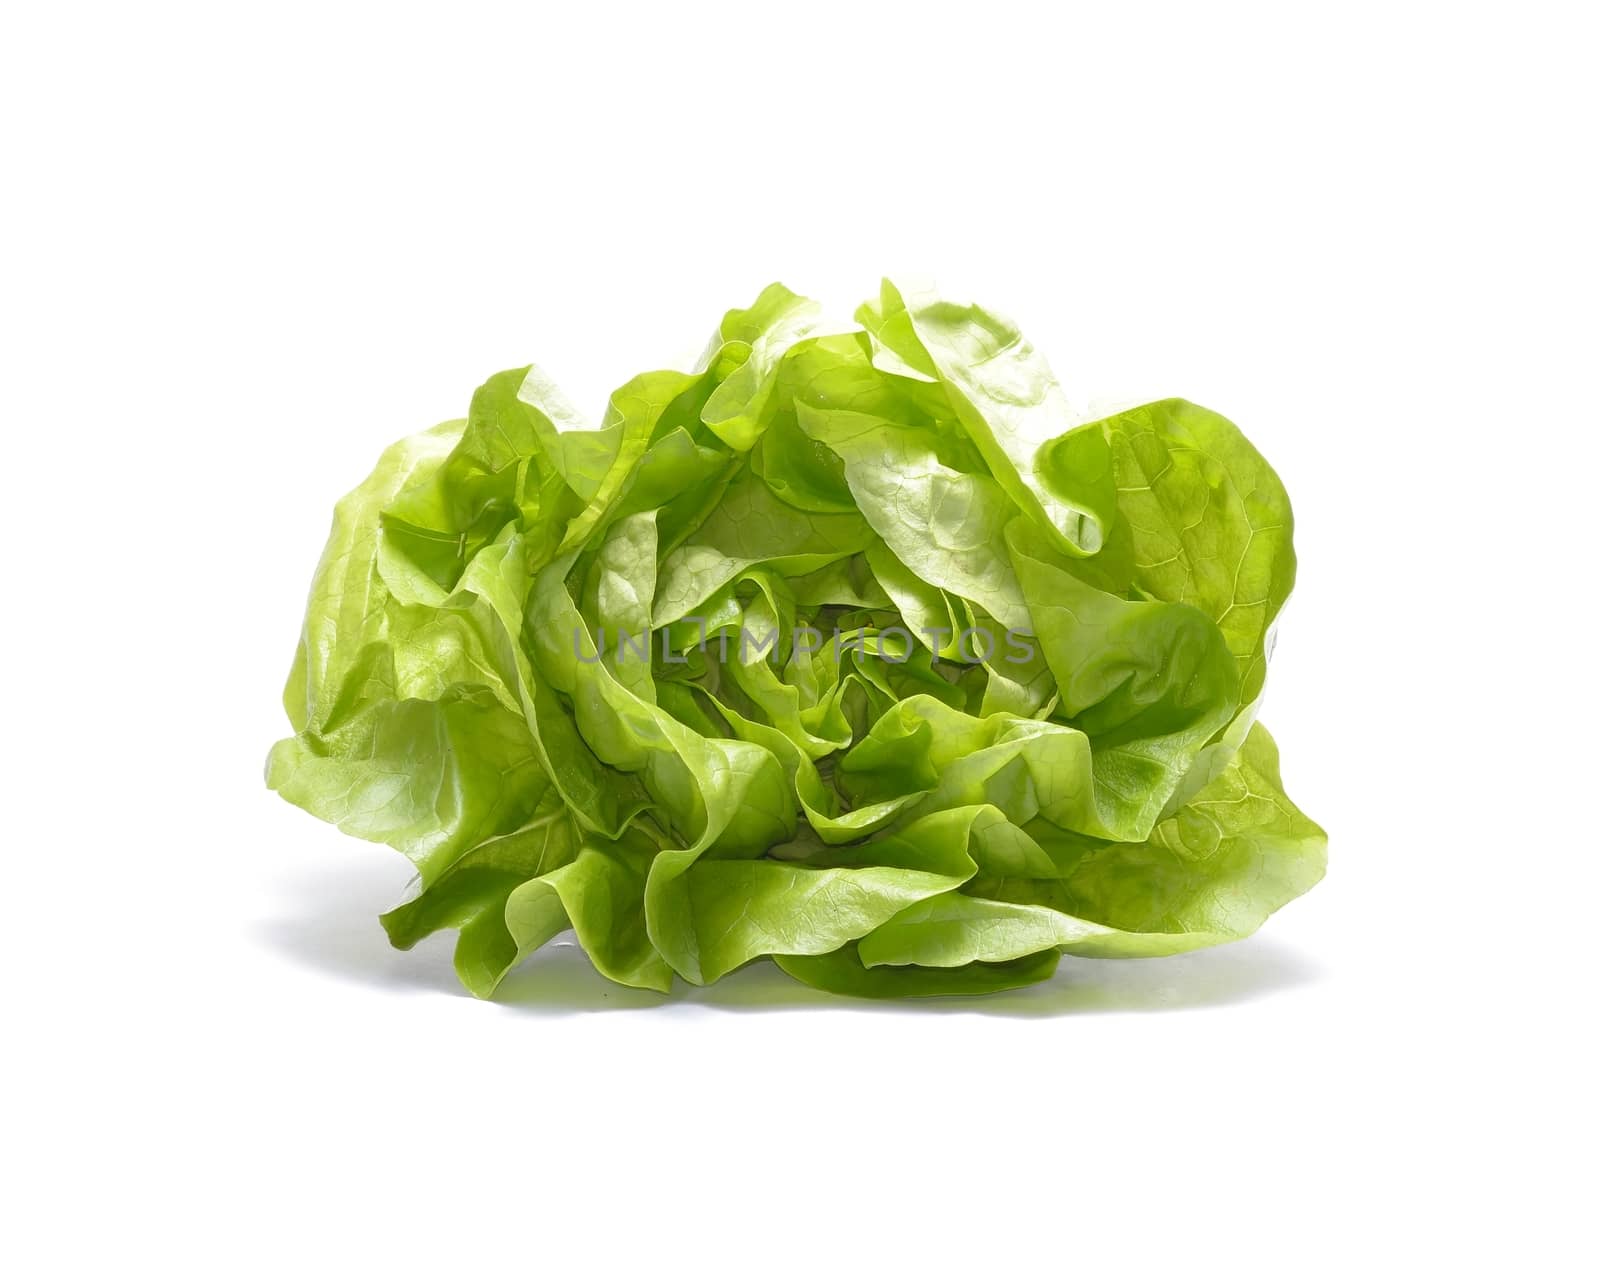 Head of lettuce isolated on white background by comet